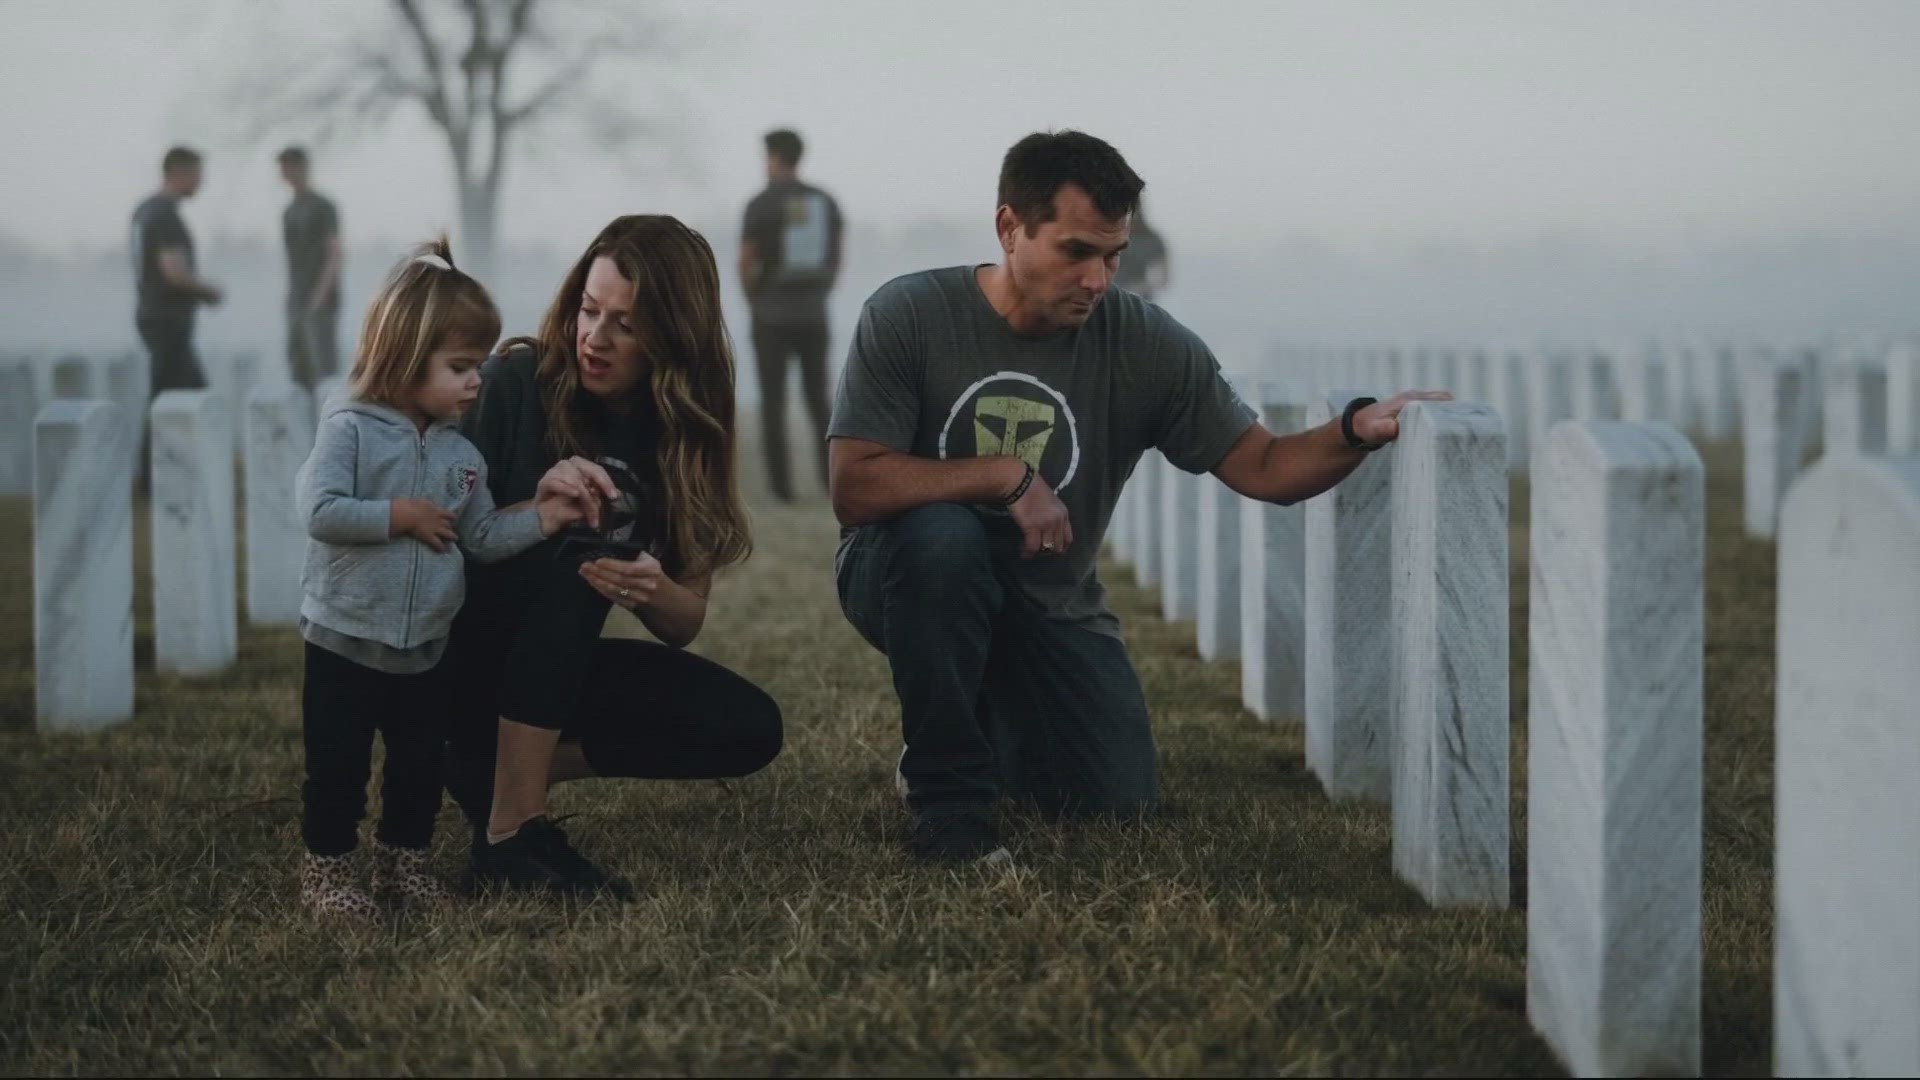 Wounded Warrior Project and Travis Manion Foundation are teaming up to place Flags of Valor tokens on gravesites of fallen service members in Jacksonville.